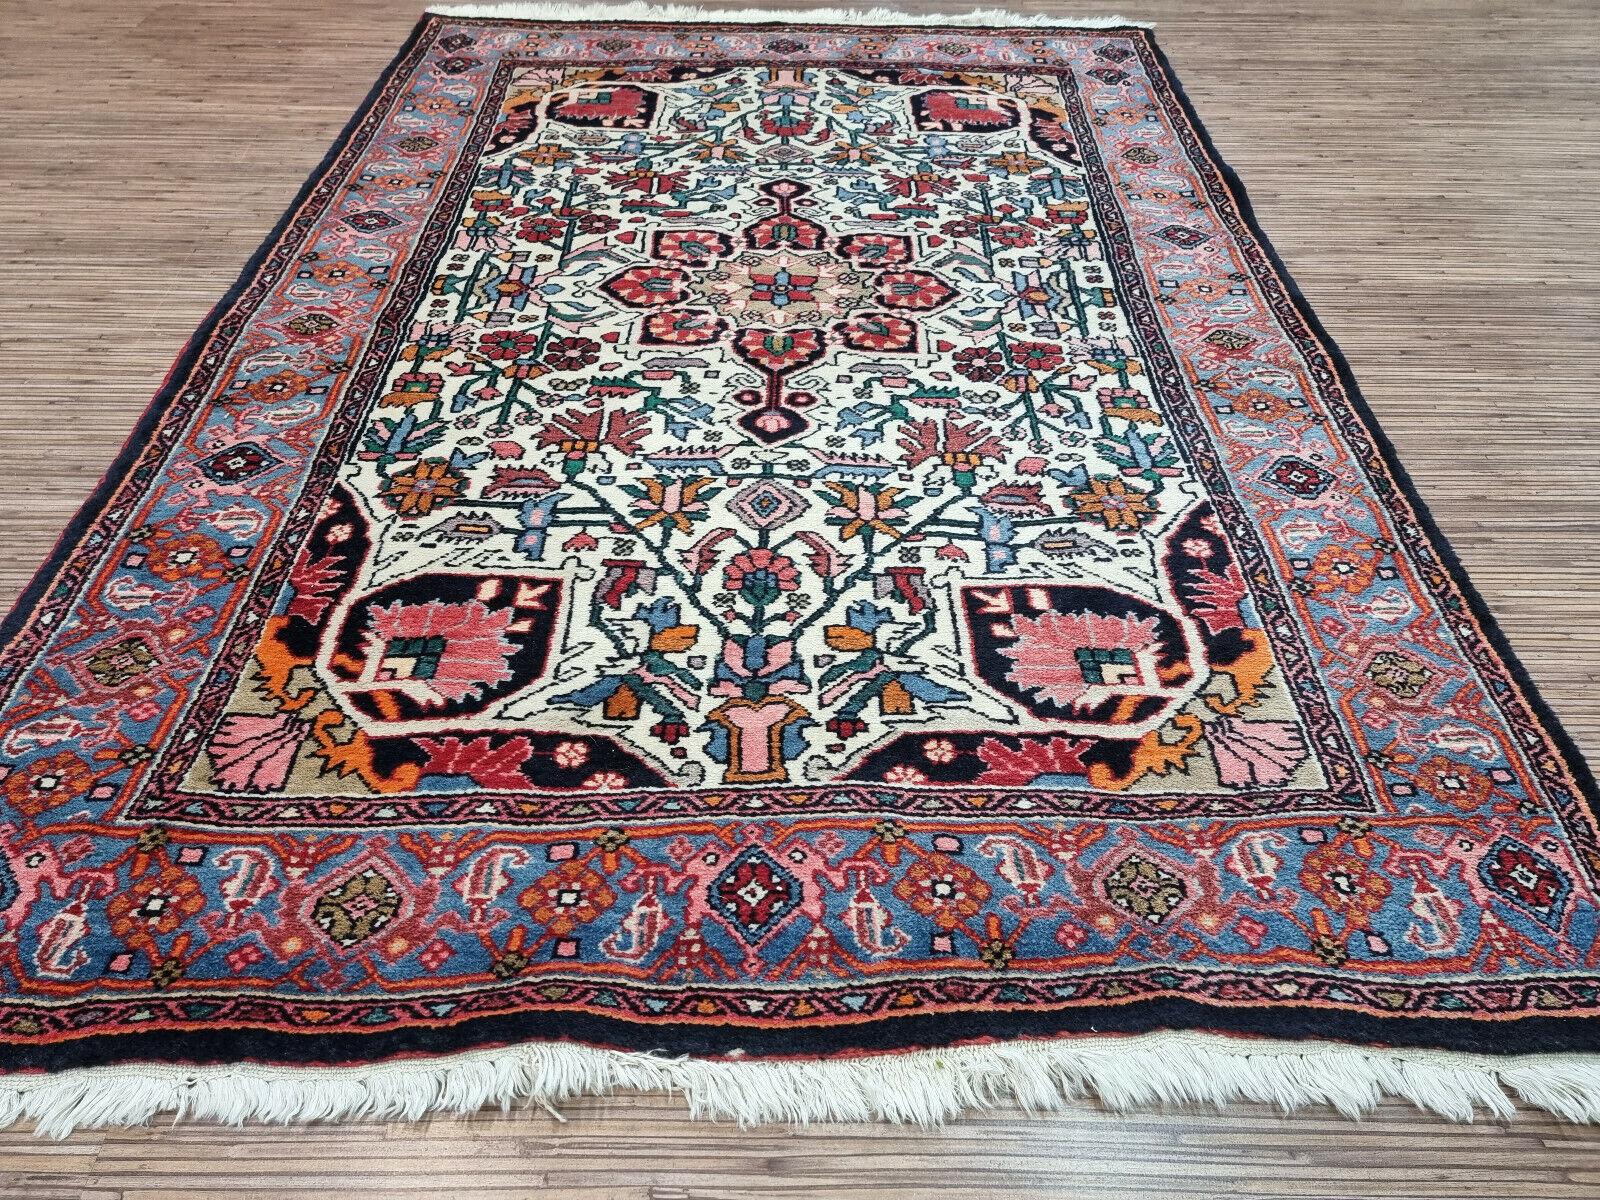 Hand-Knotted Handmade Vintage Persian Style Bidjar Rug 3.4' x 5', 1970s - 1D88 For Sale